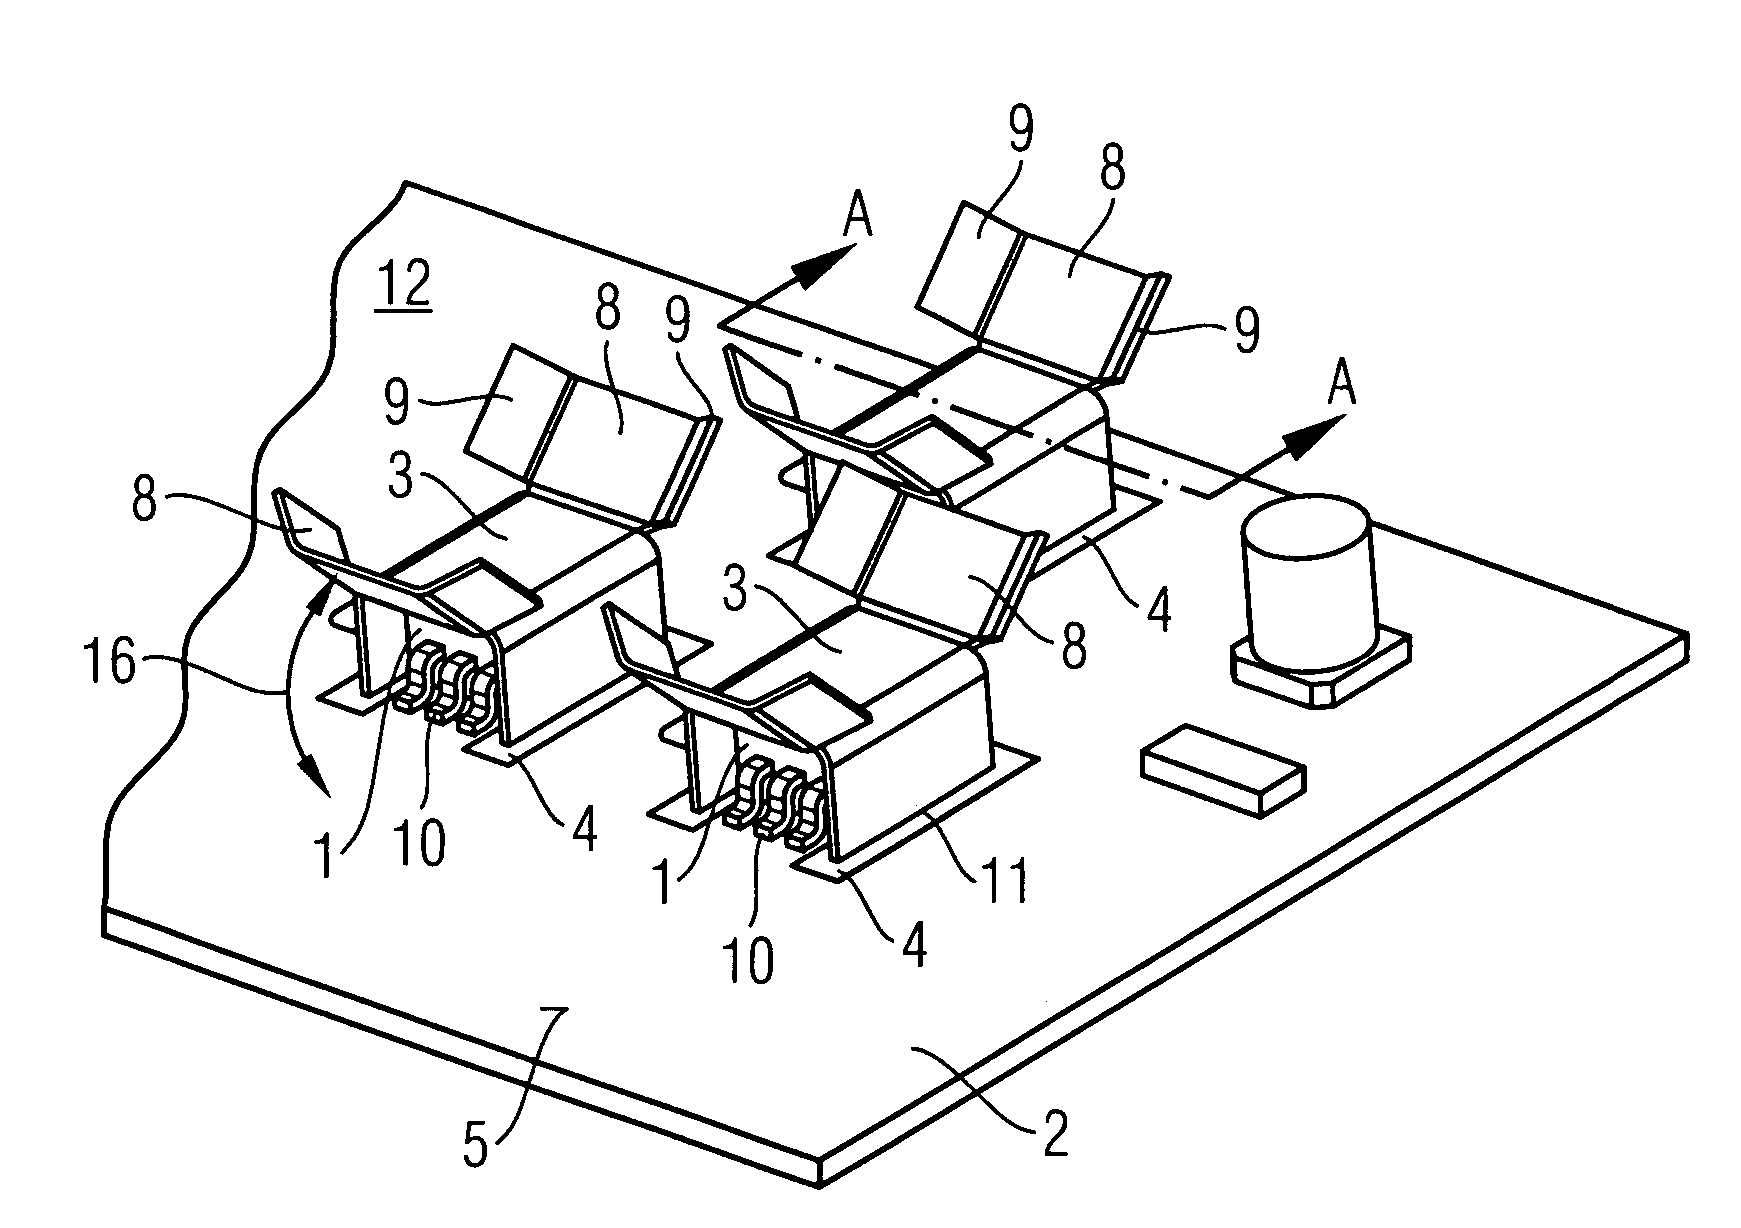 Arrangement for cooling SMD power components on a printed circuit board